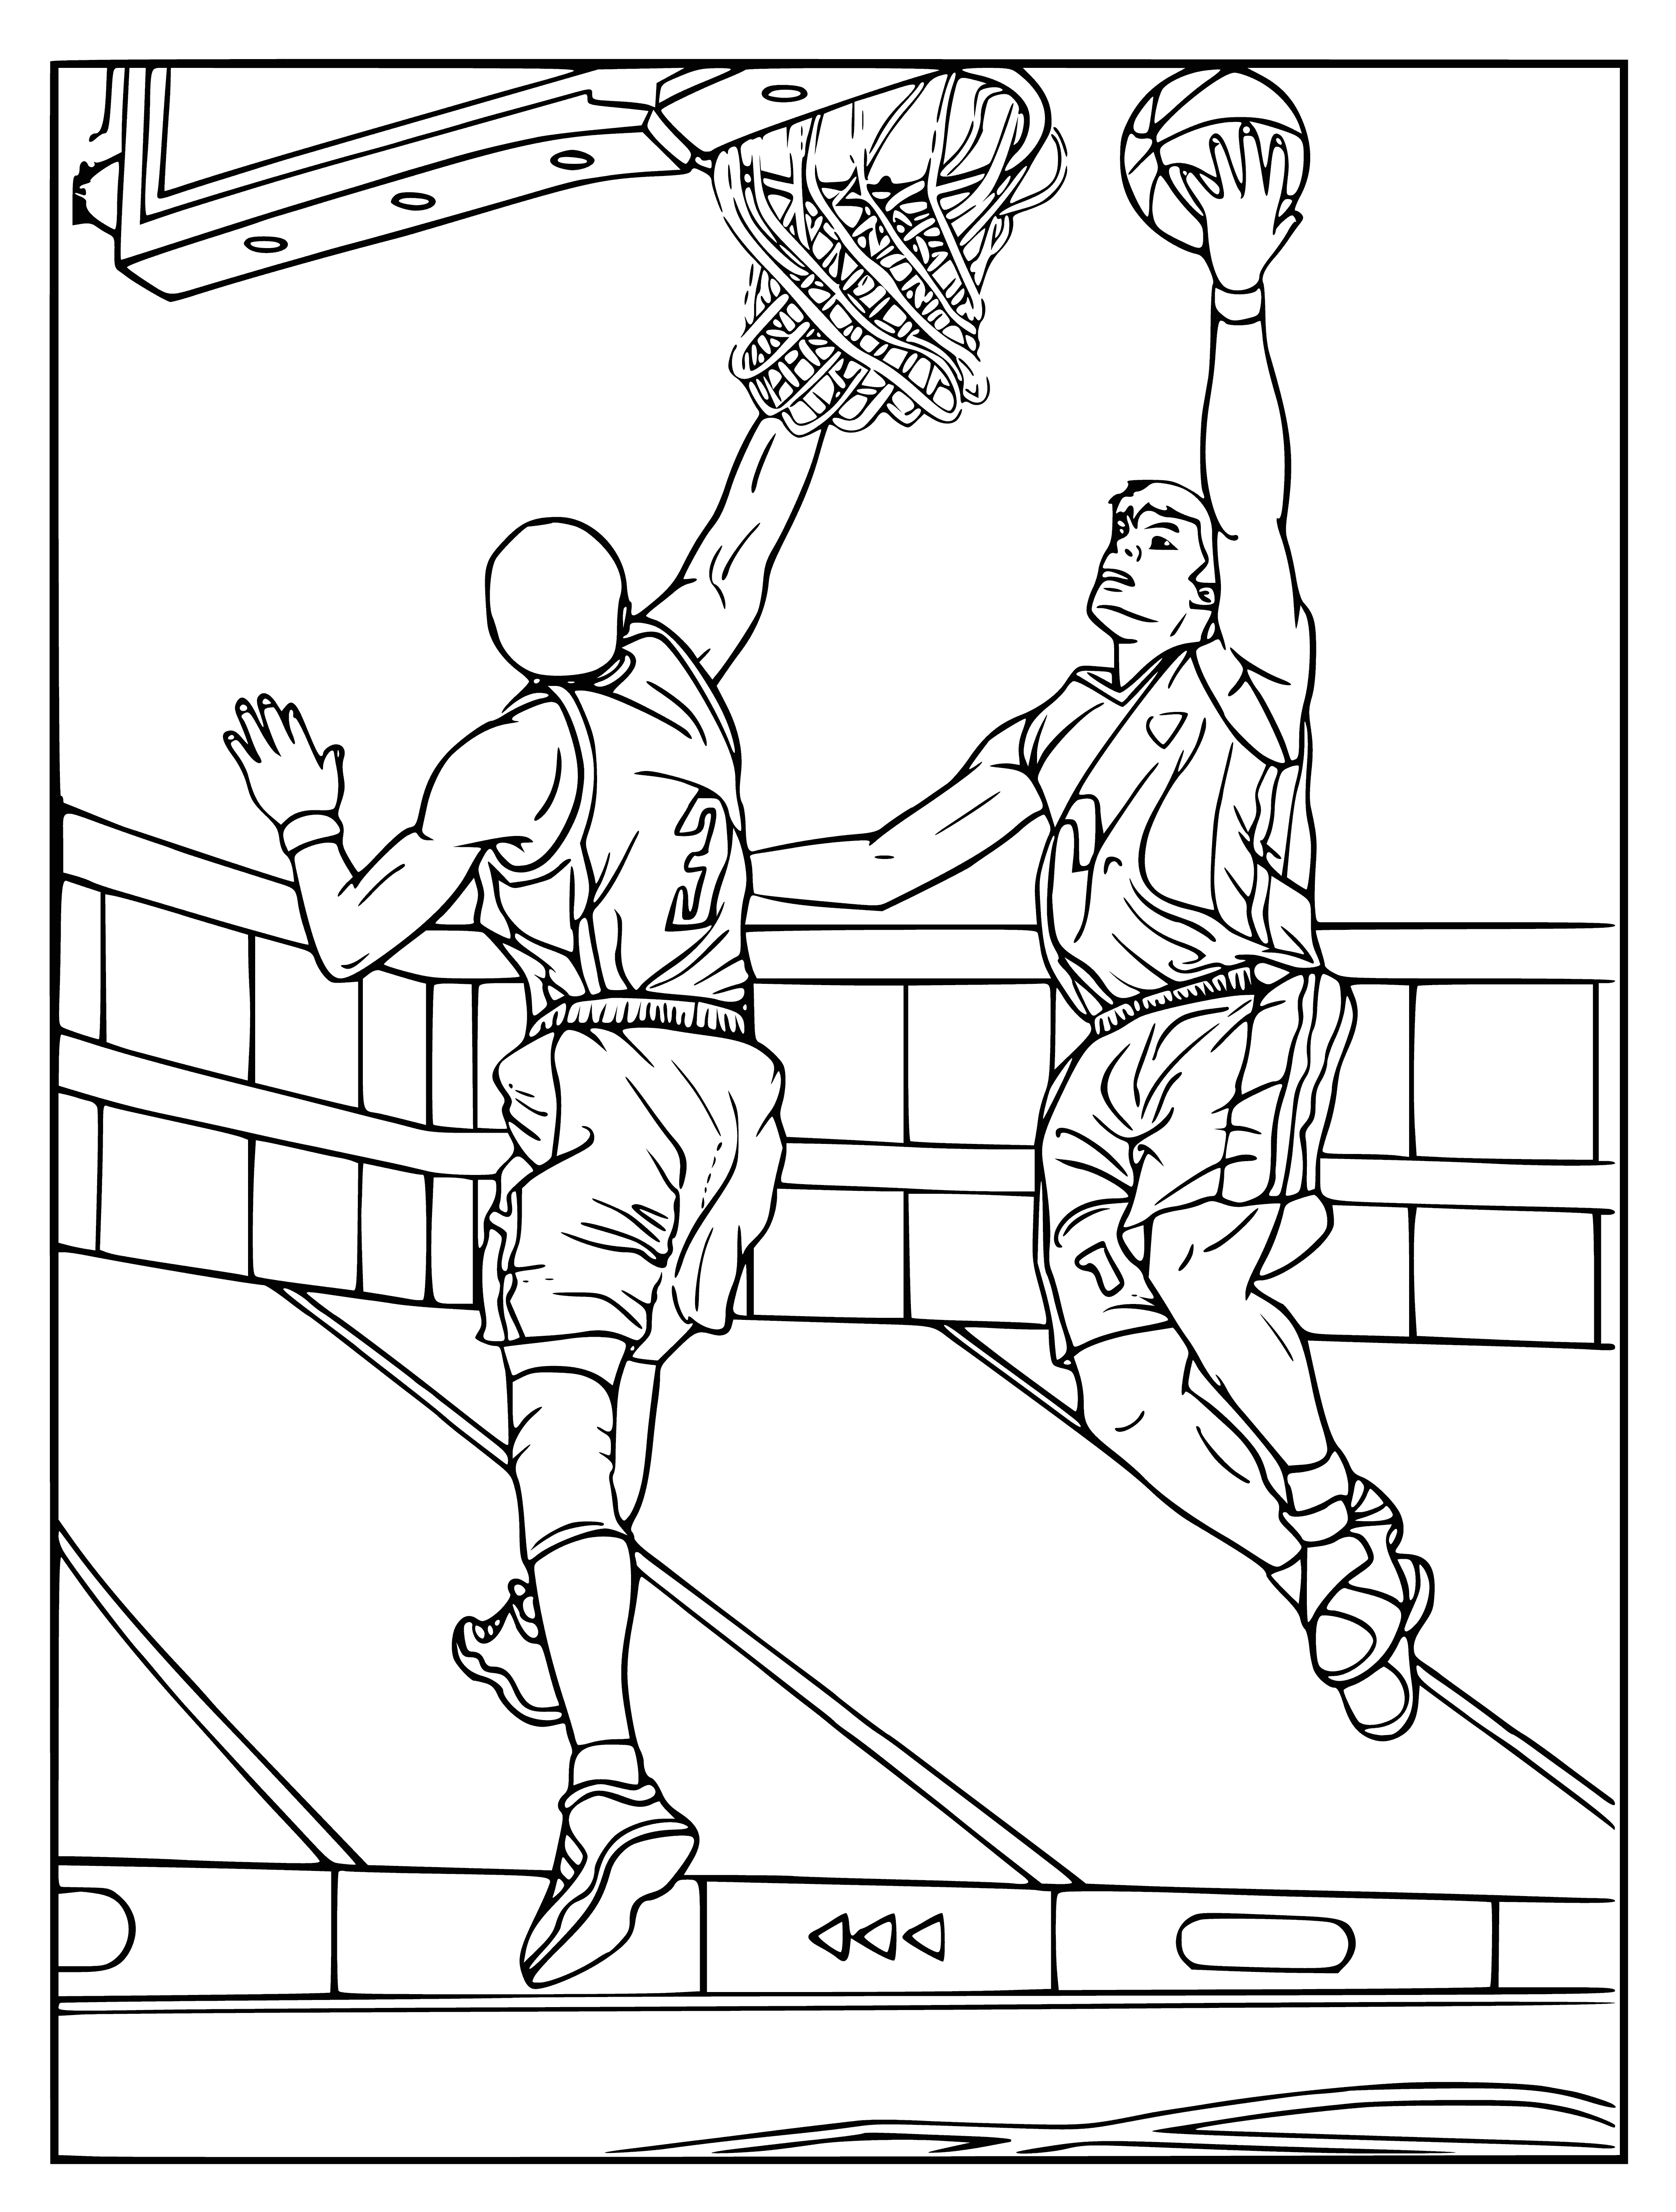 coloring page: Person plays basketball, shooting ball towards hoop on pole with backboard.